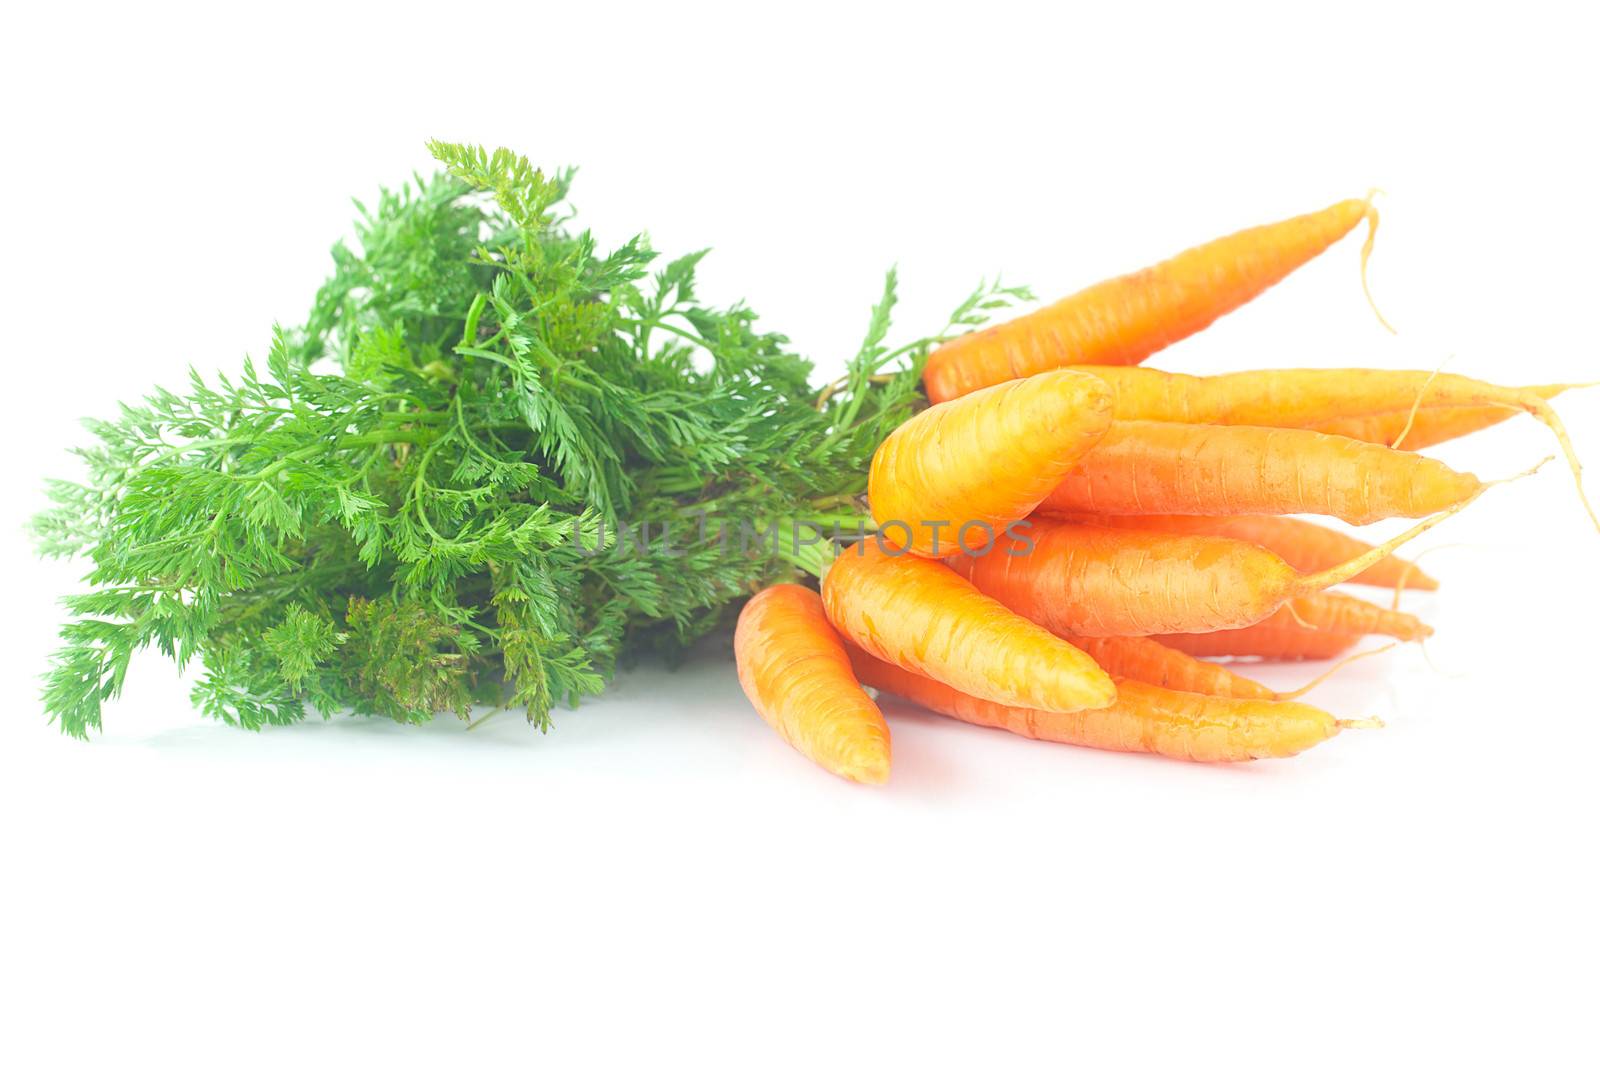 bunch of carrots with green leaves isolated on white by jannyjus